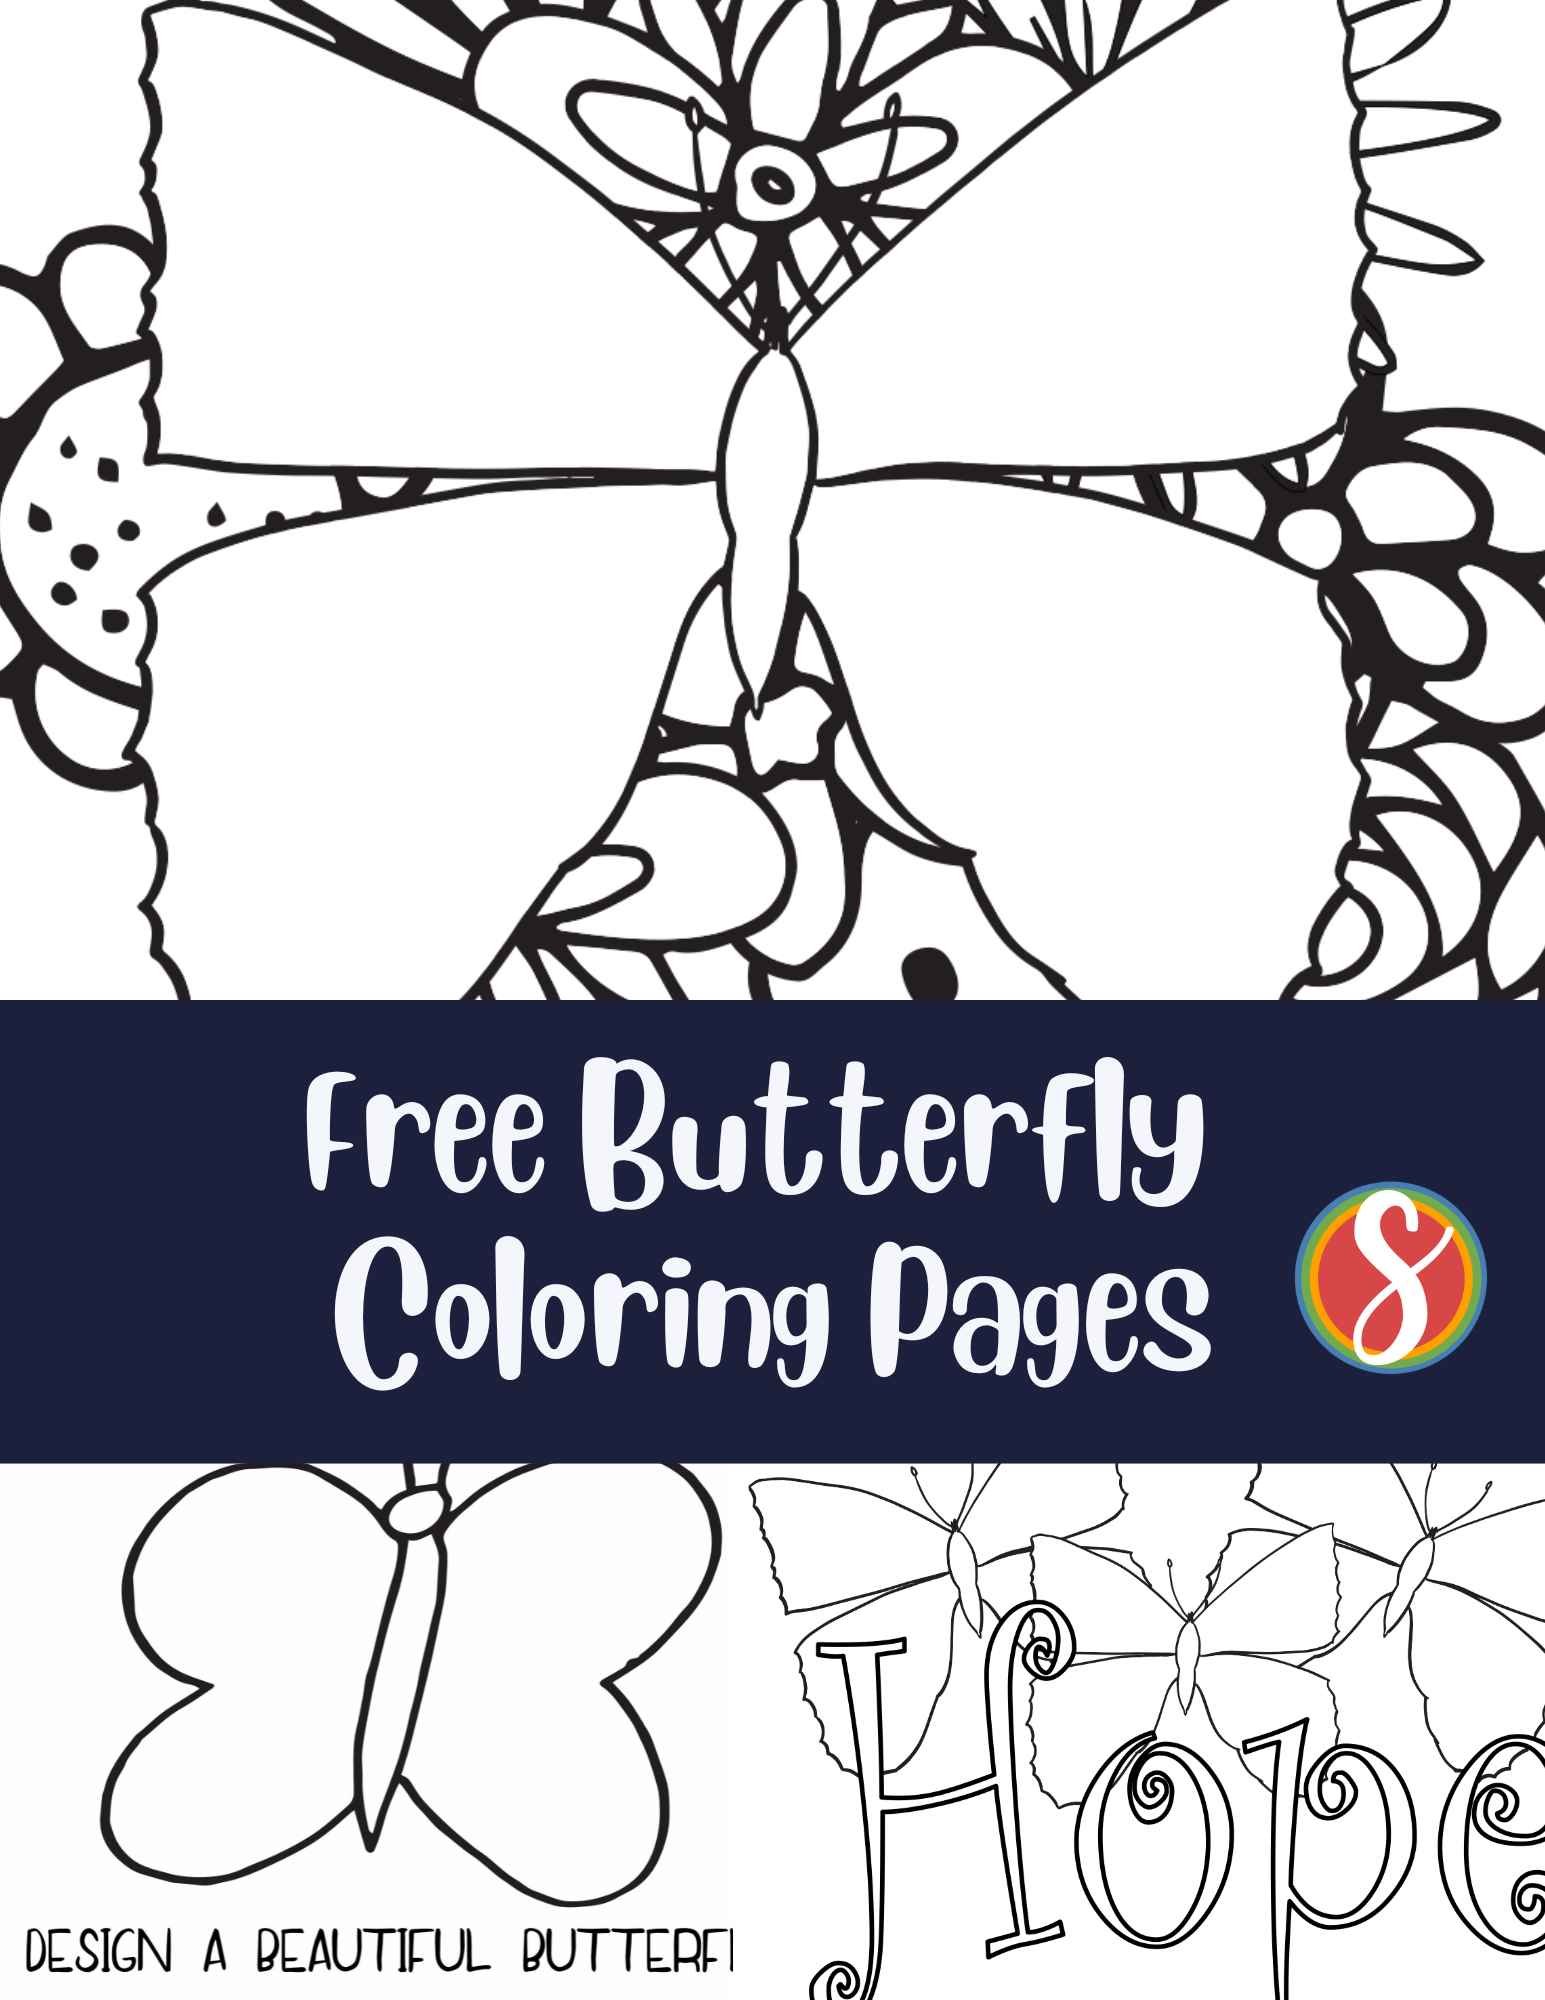 Free butterfly coloring pages â stevie doodles